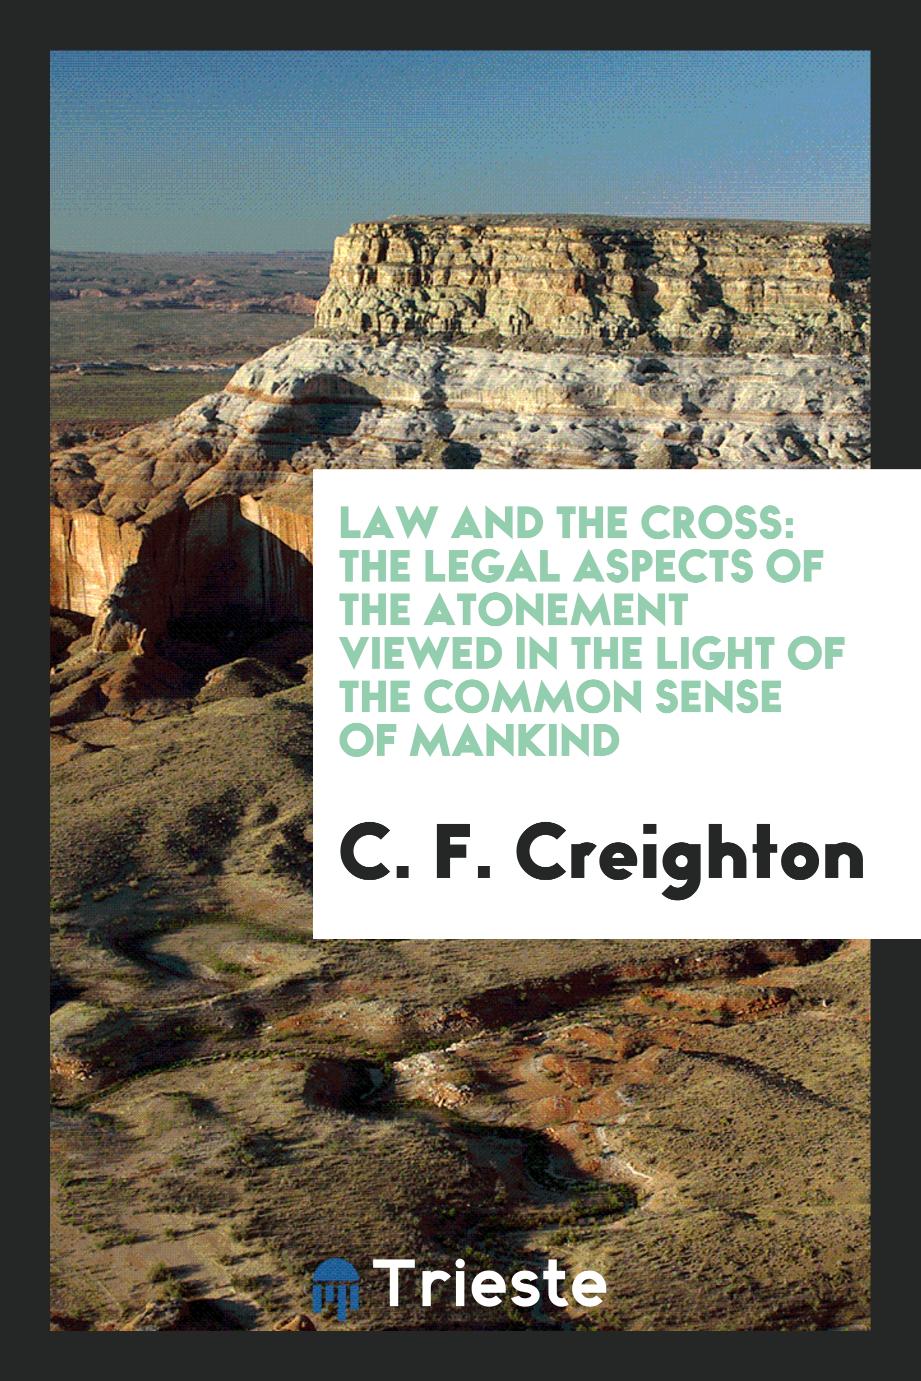 Law and the Cross: the legal aspects of the atonement viewed in the light of the common sense of mankind